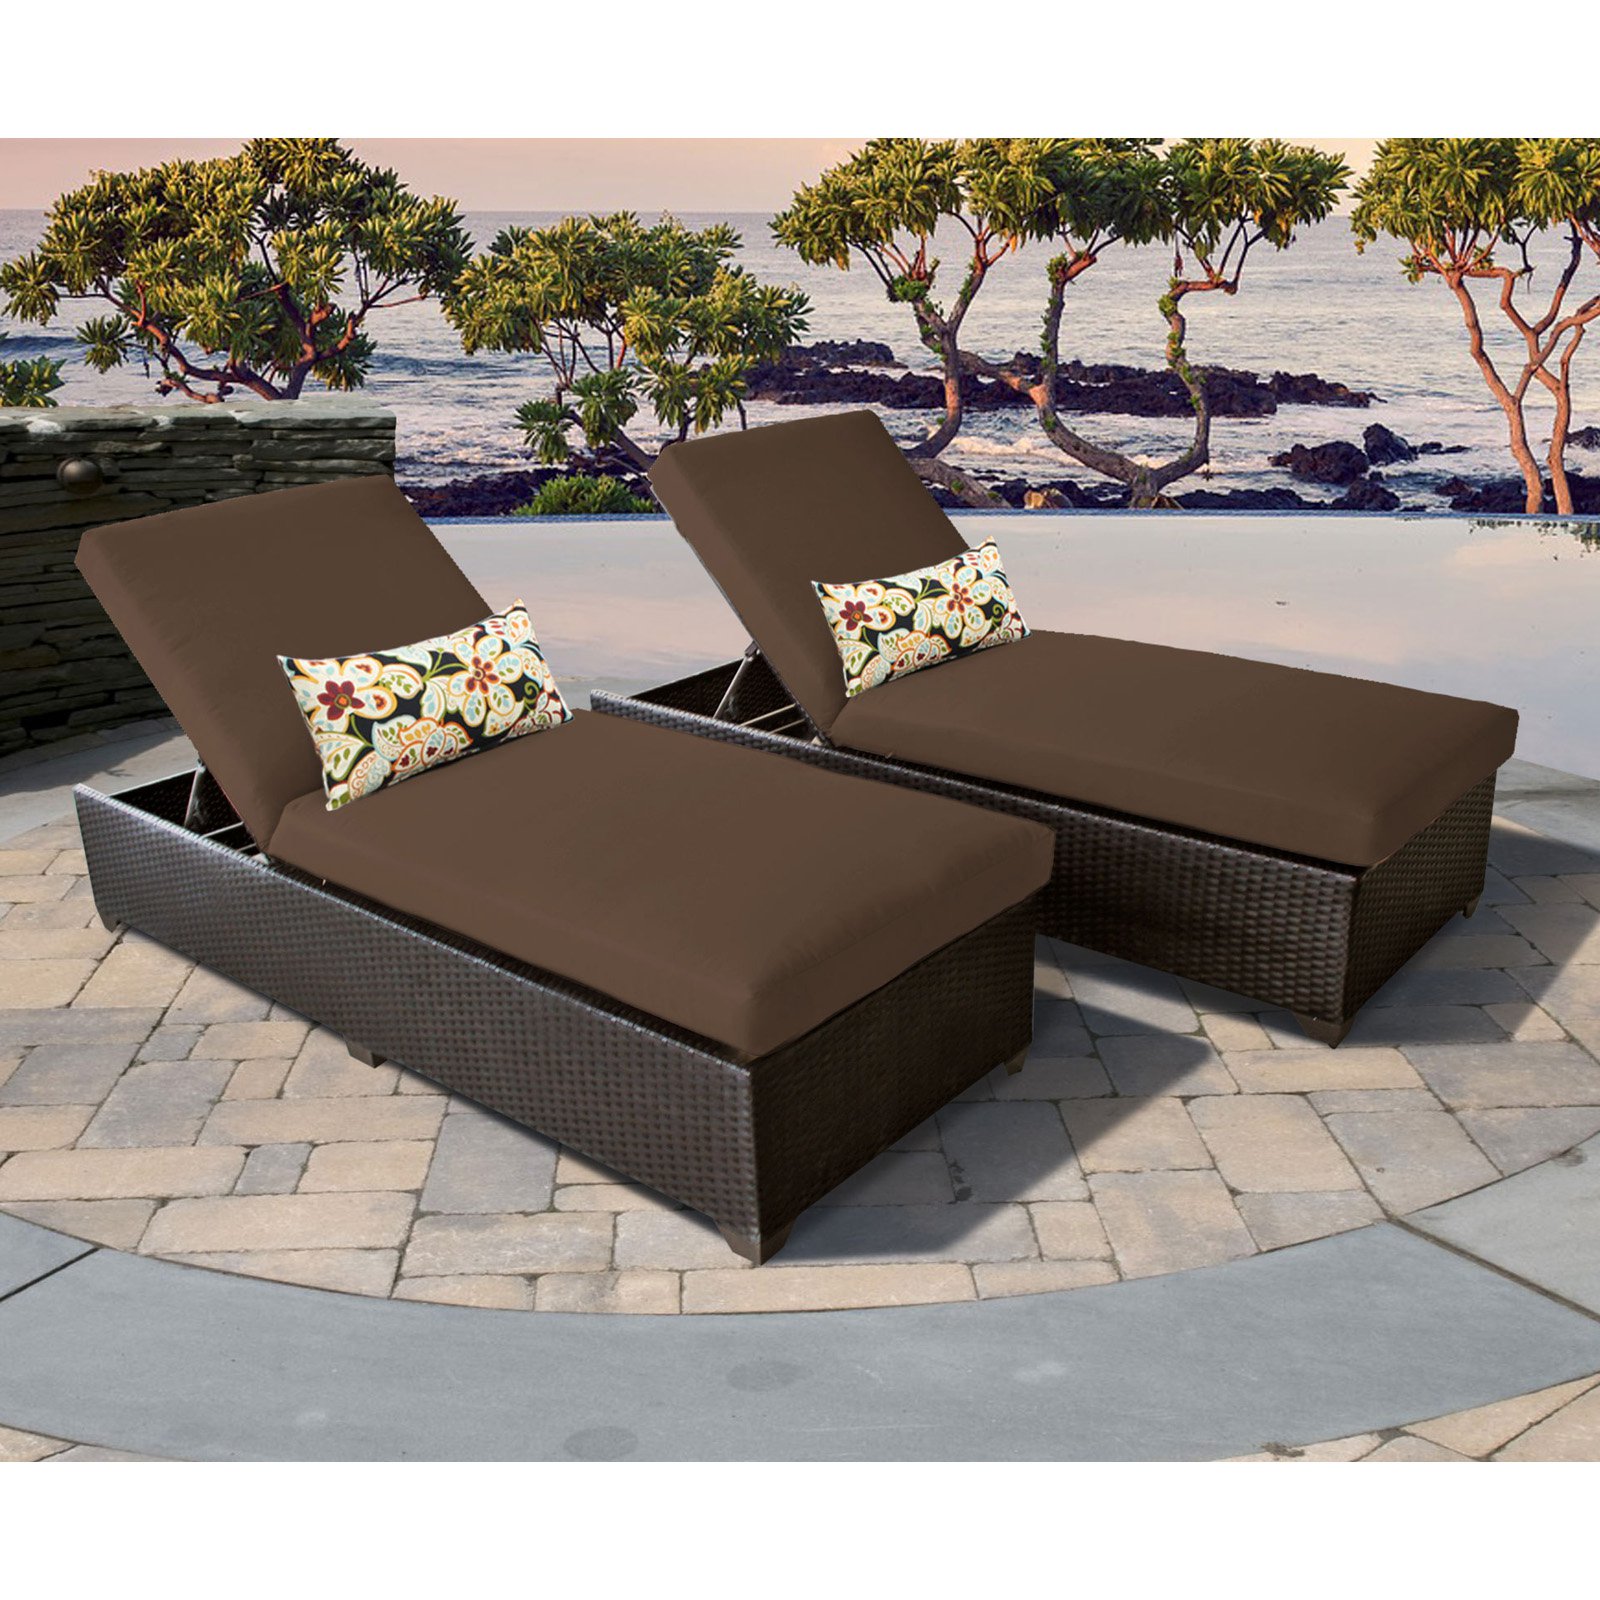 Belle Chaise Set of 2 Outdoor Wicker Patio Furniture-Color:Tangerine - image 5 of 11